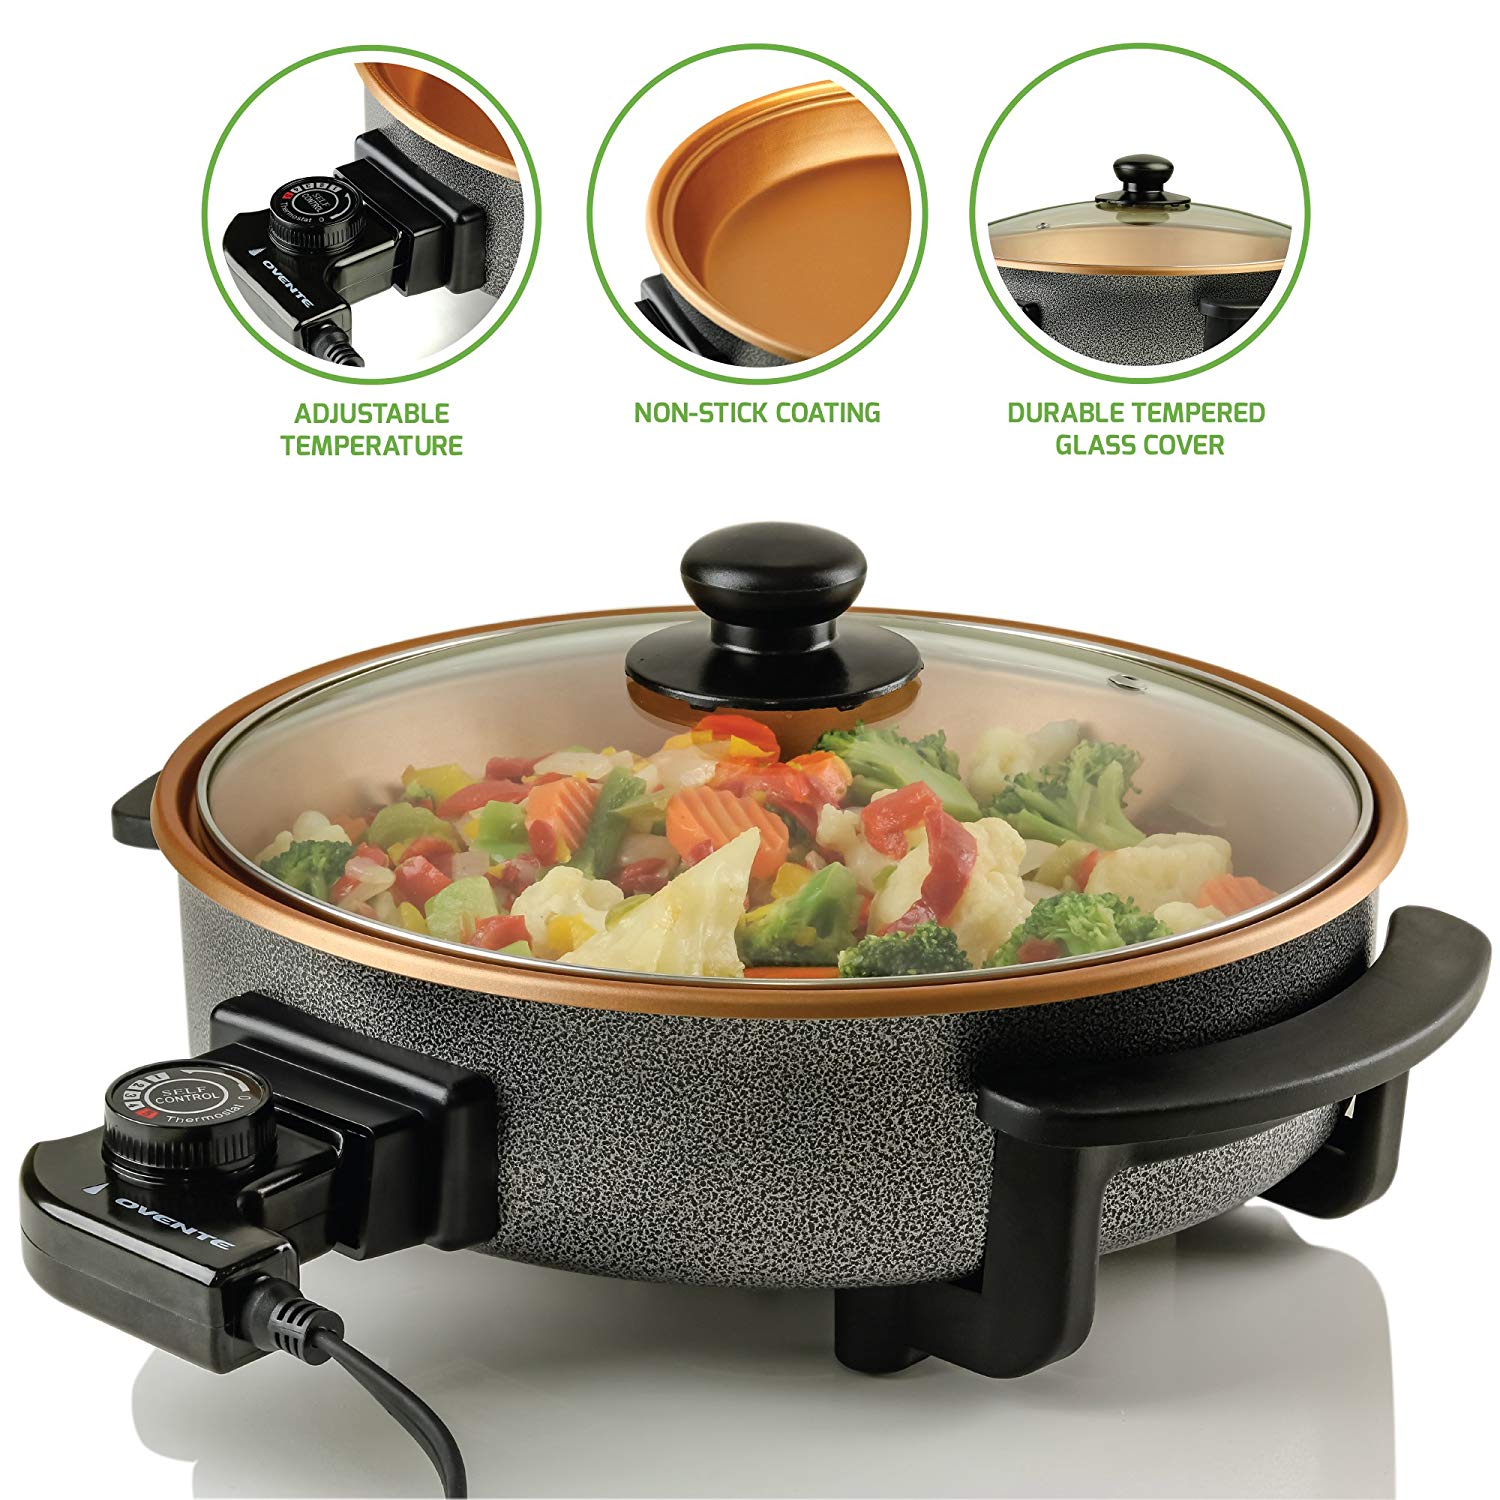 OVENTE Electric Skillet and Frying Pan, 12" Round Cooker with Nonstick Coating, Copper SK11112CO - image 2 of 9